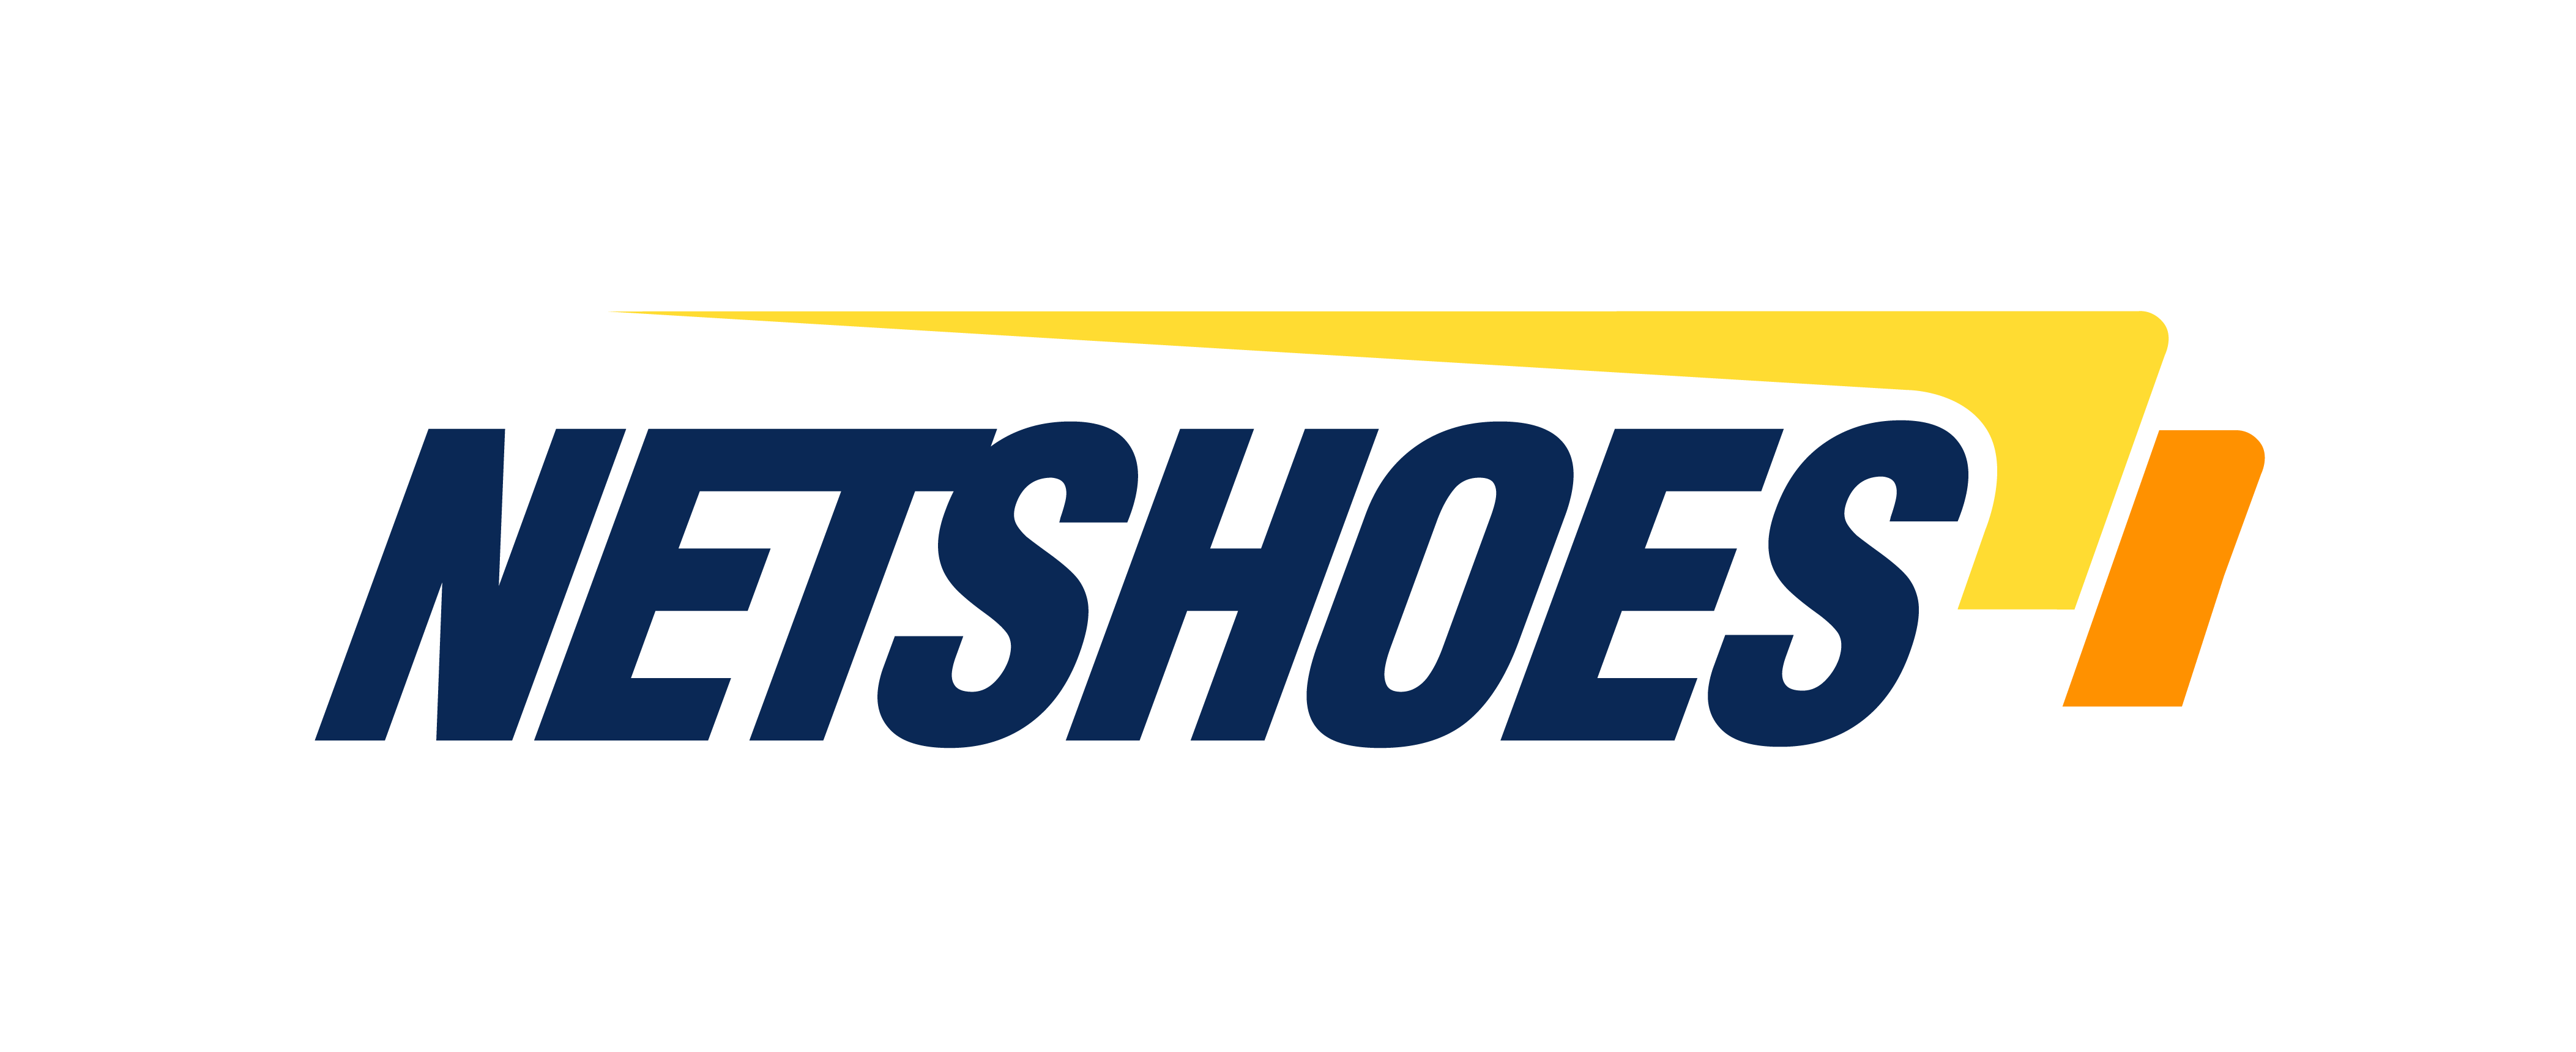 netshoes river plate